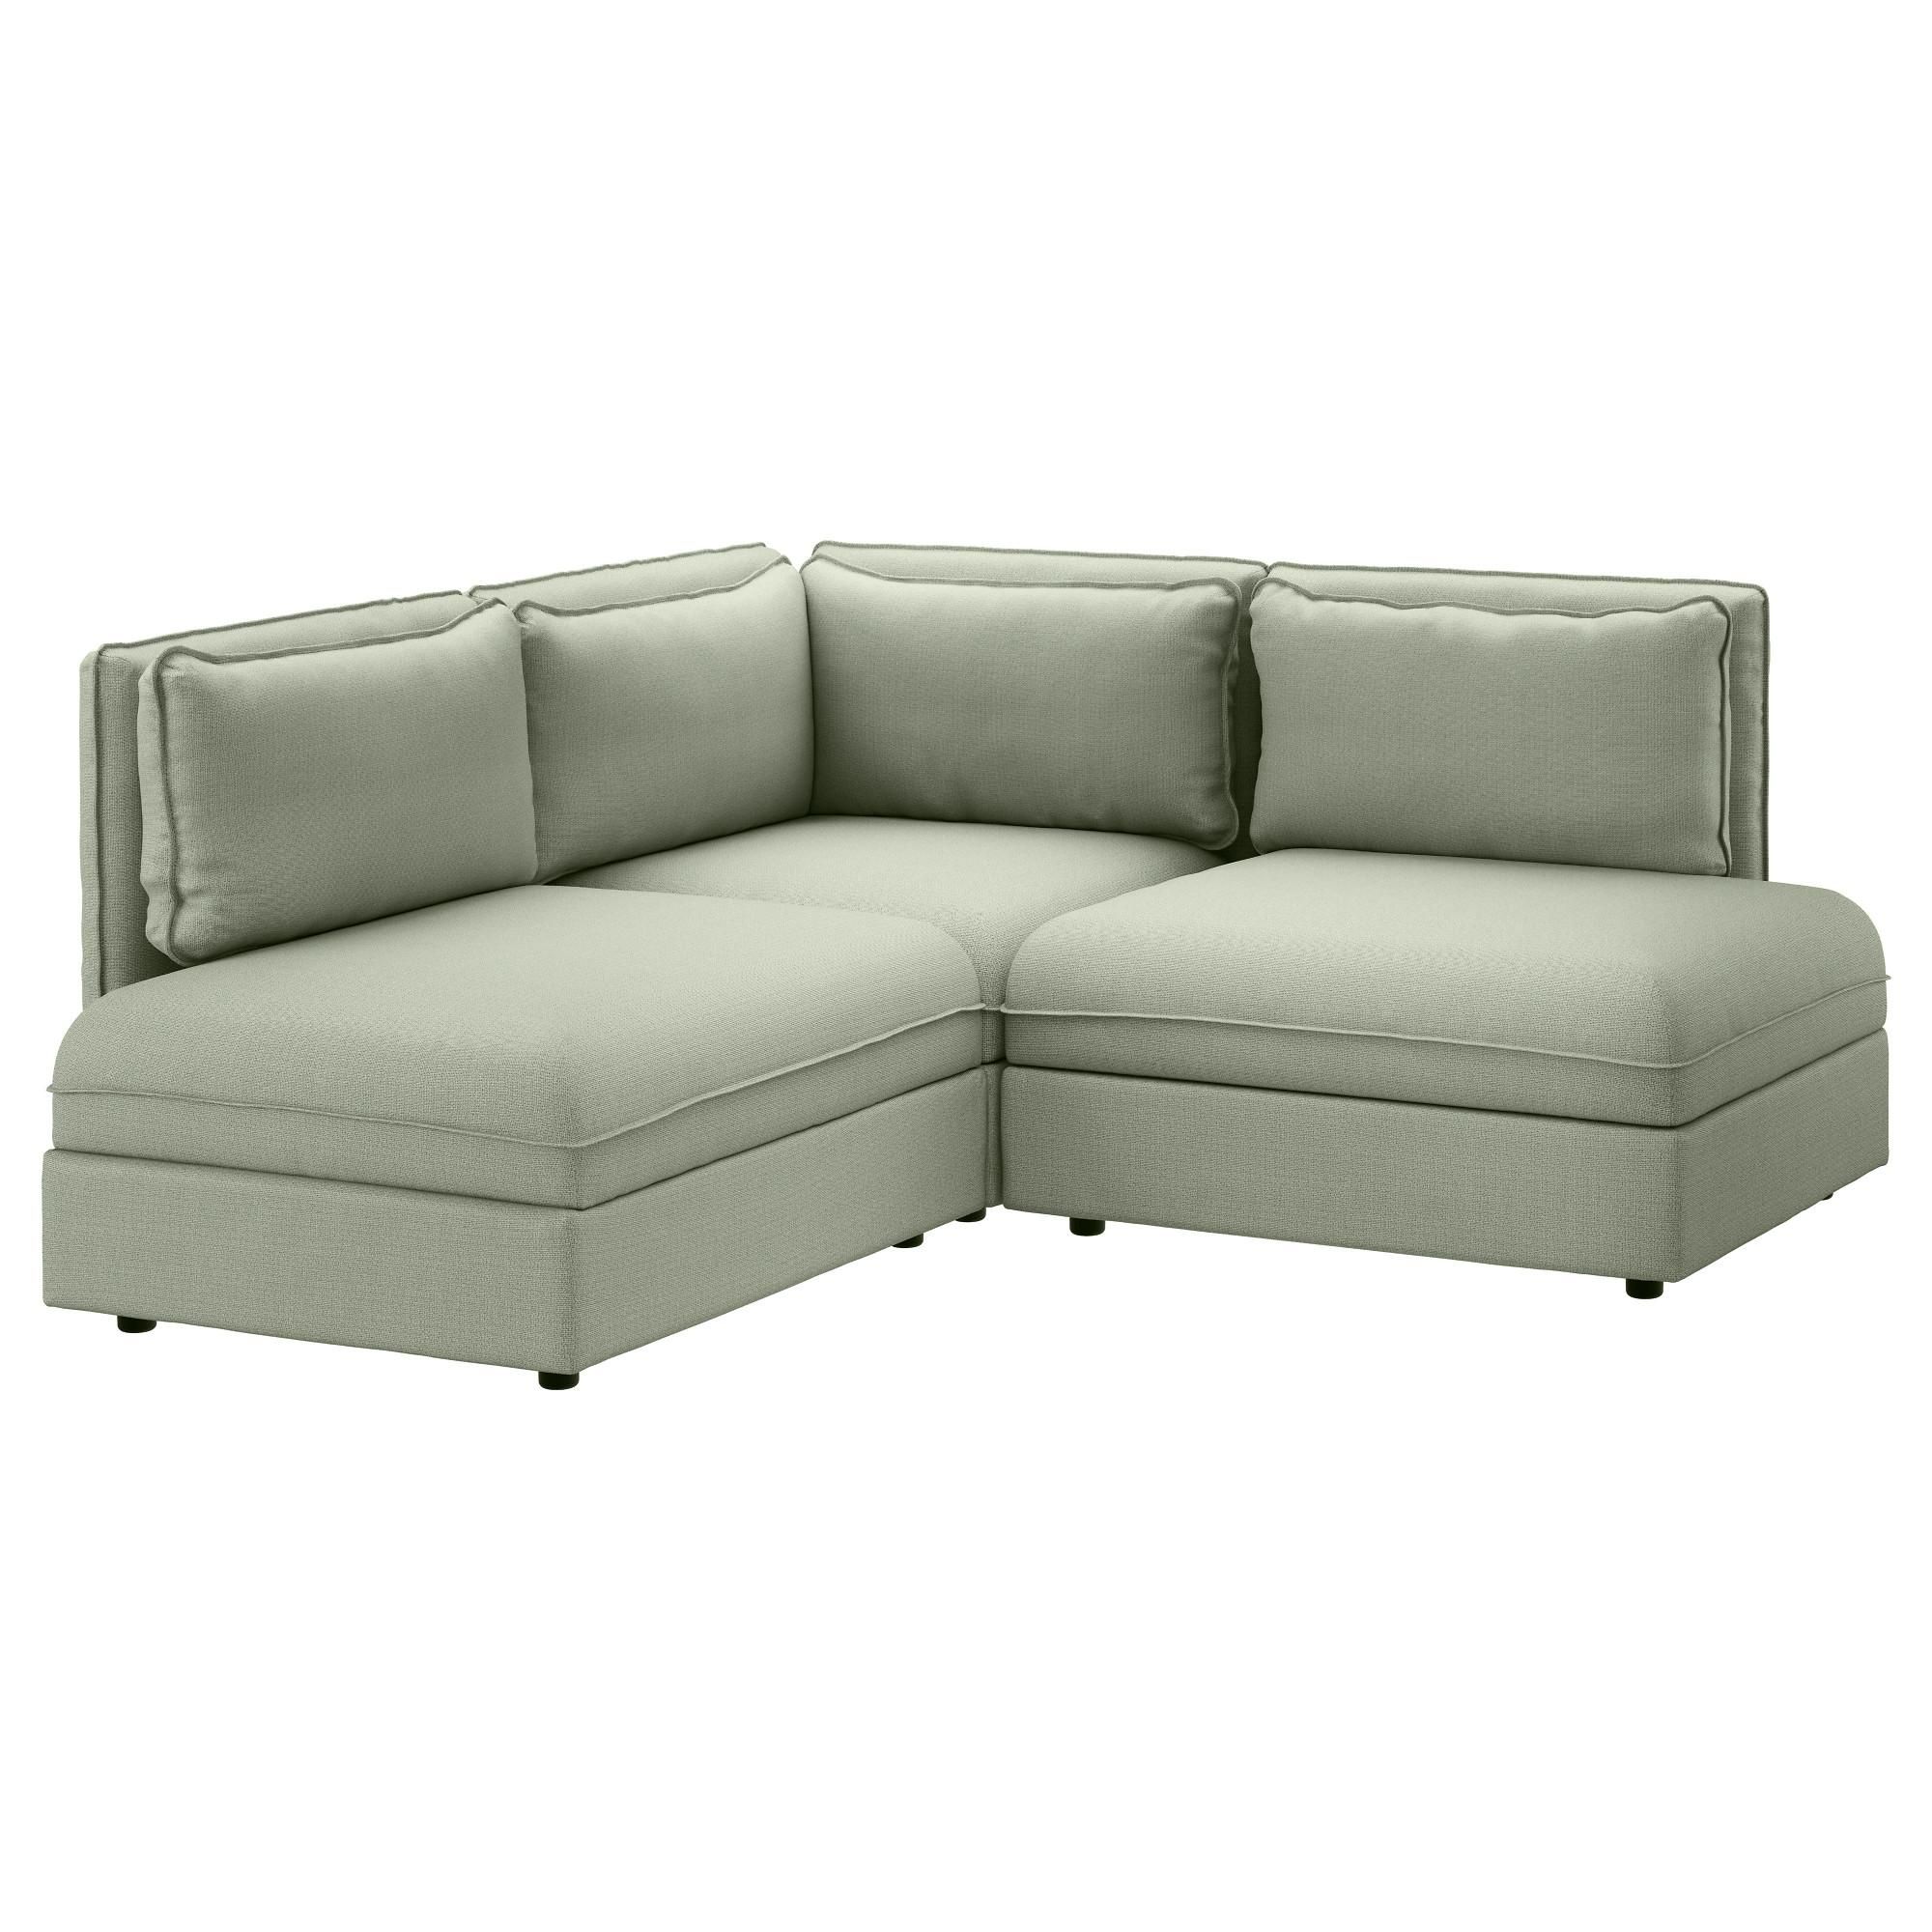 Sectional Sofas & Couches – Ikea In Mini Sectionals (View 18 of 20)